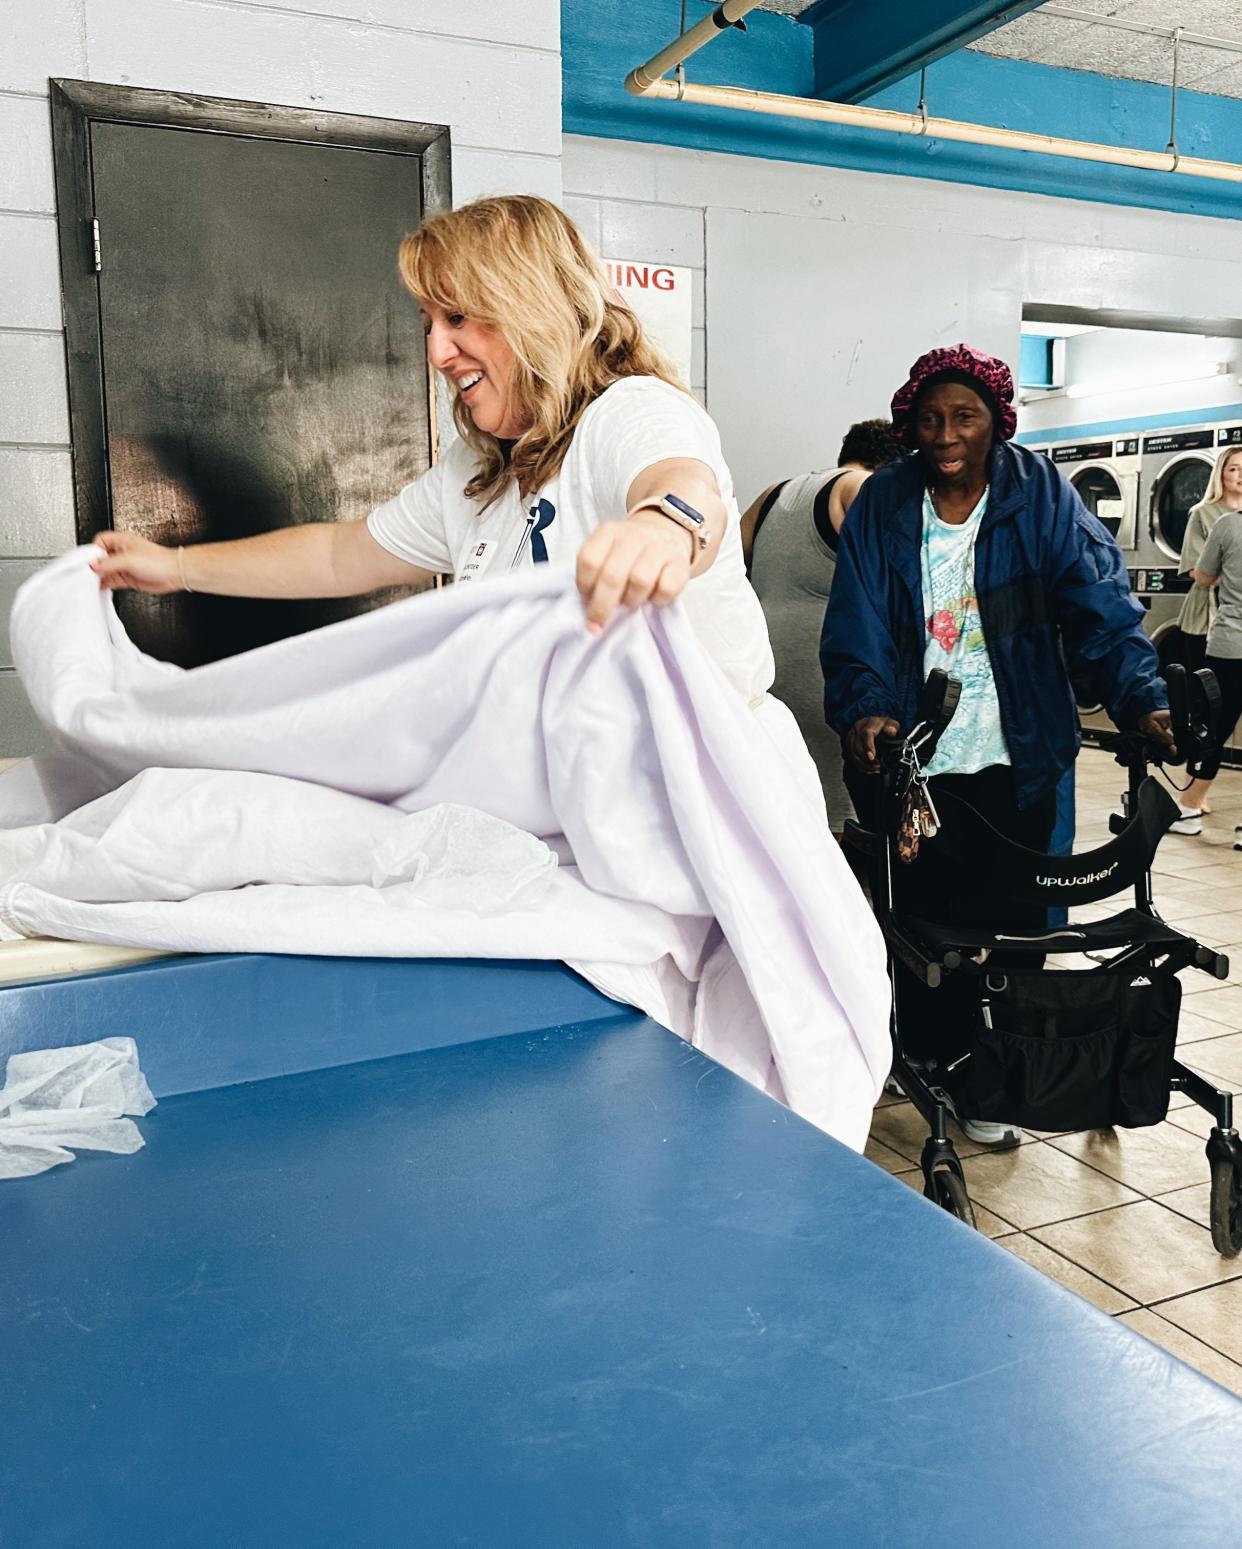 At a Jacksonville laundromat, a volunteer handles laundry for a customer at a recent free laundry session organized by the Laundry Project.